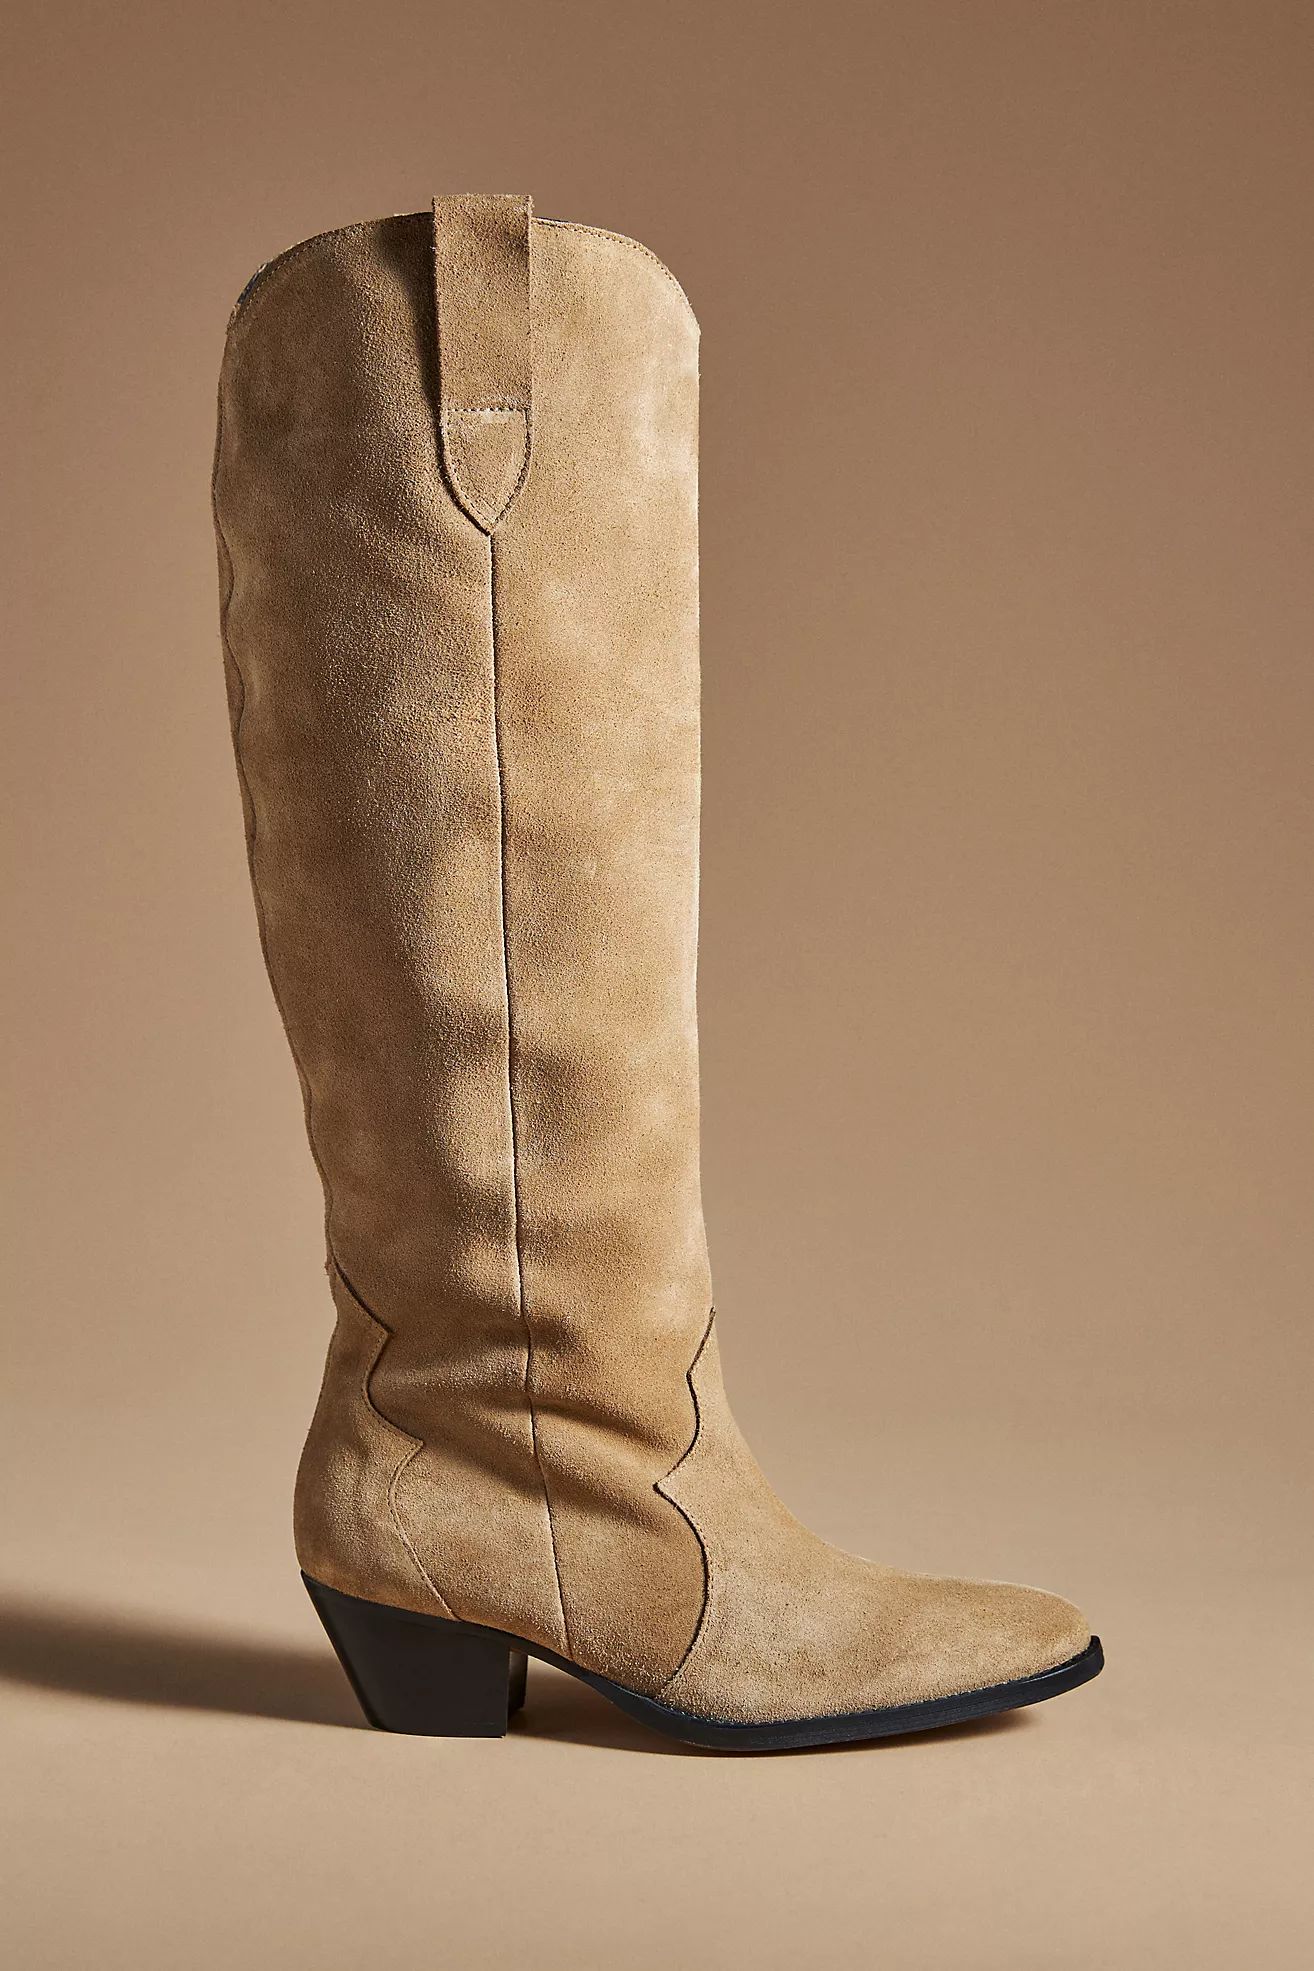 By Anthropologie Western Boots | Anthropologie (US)